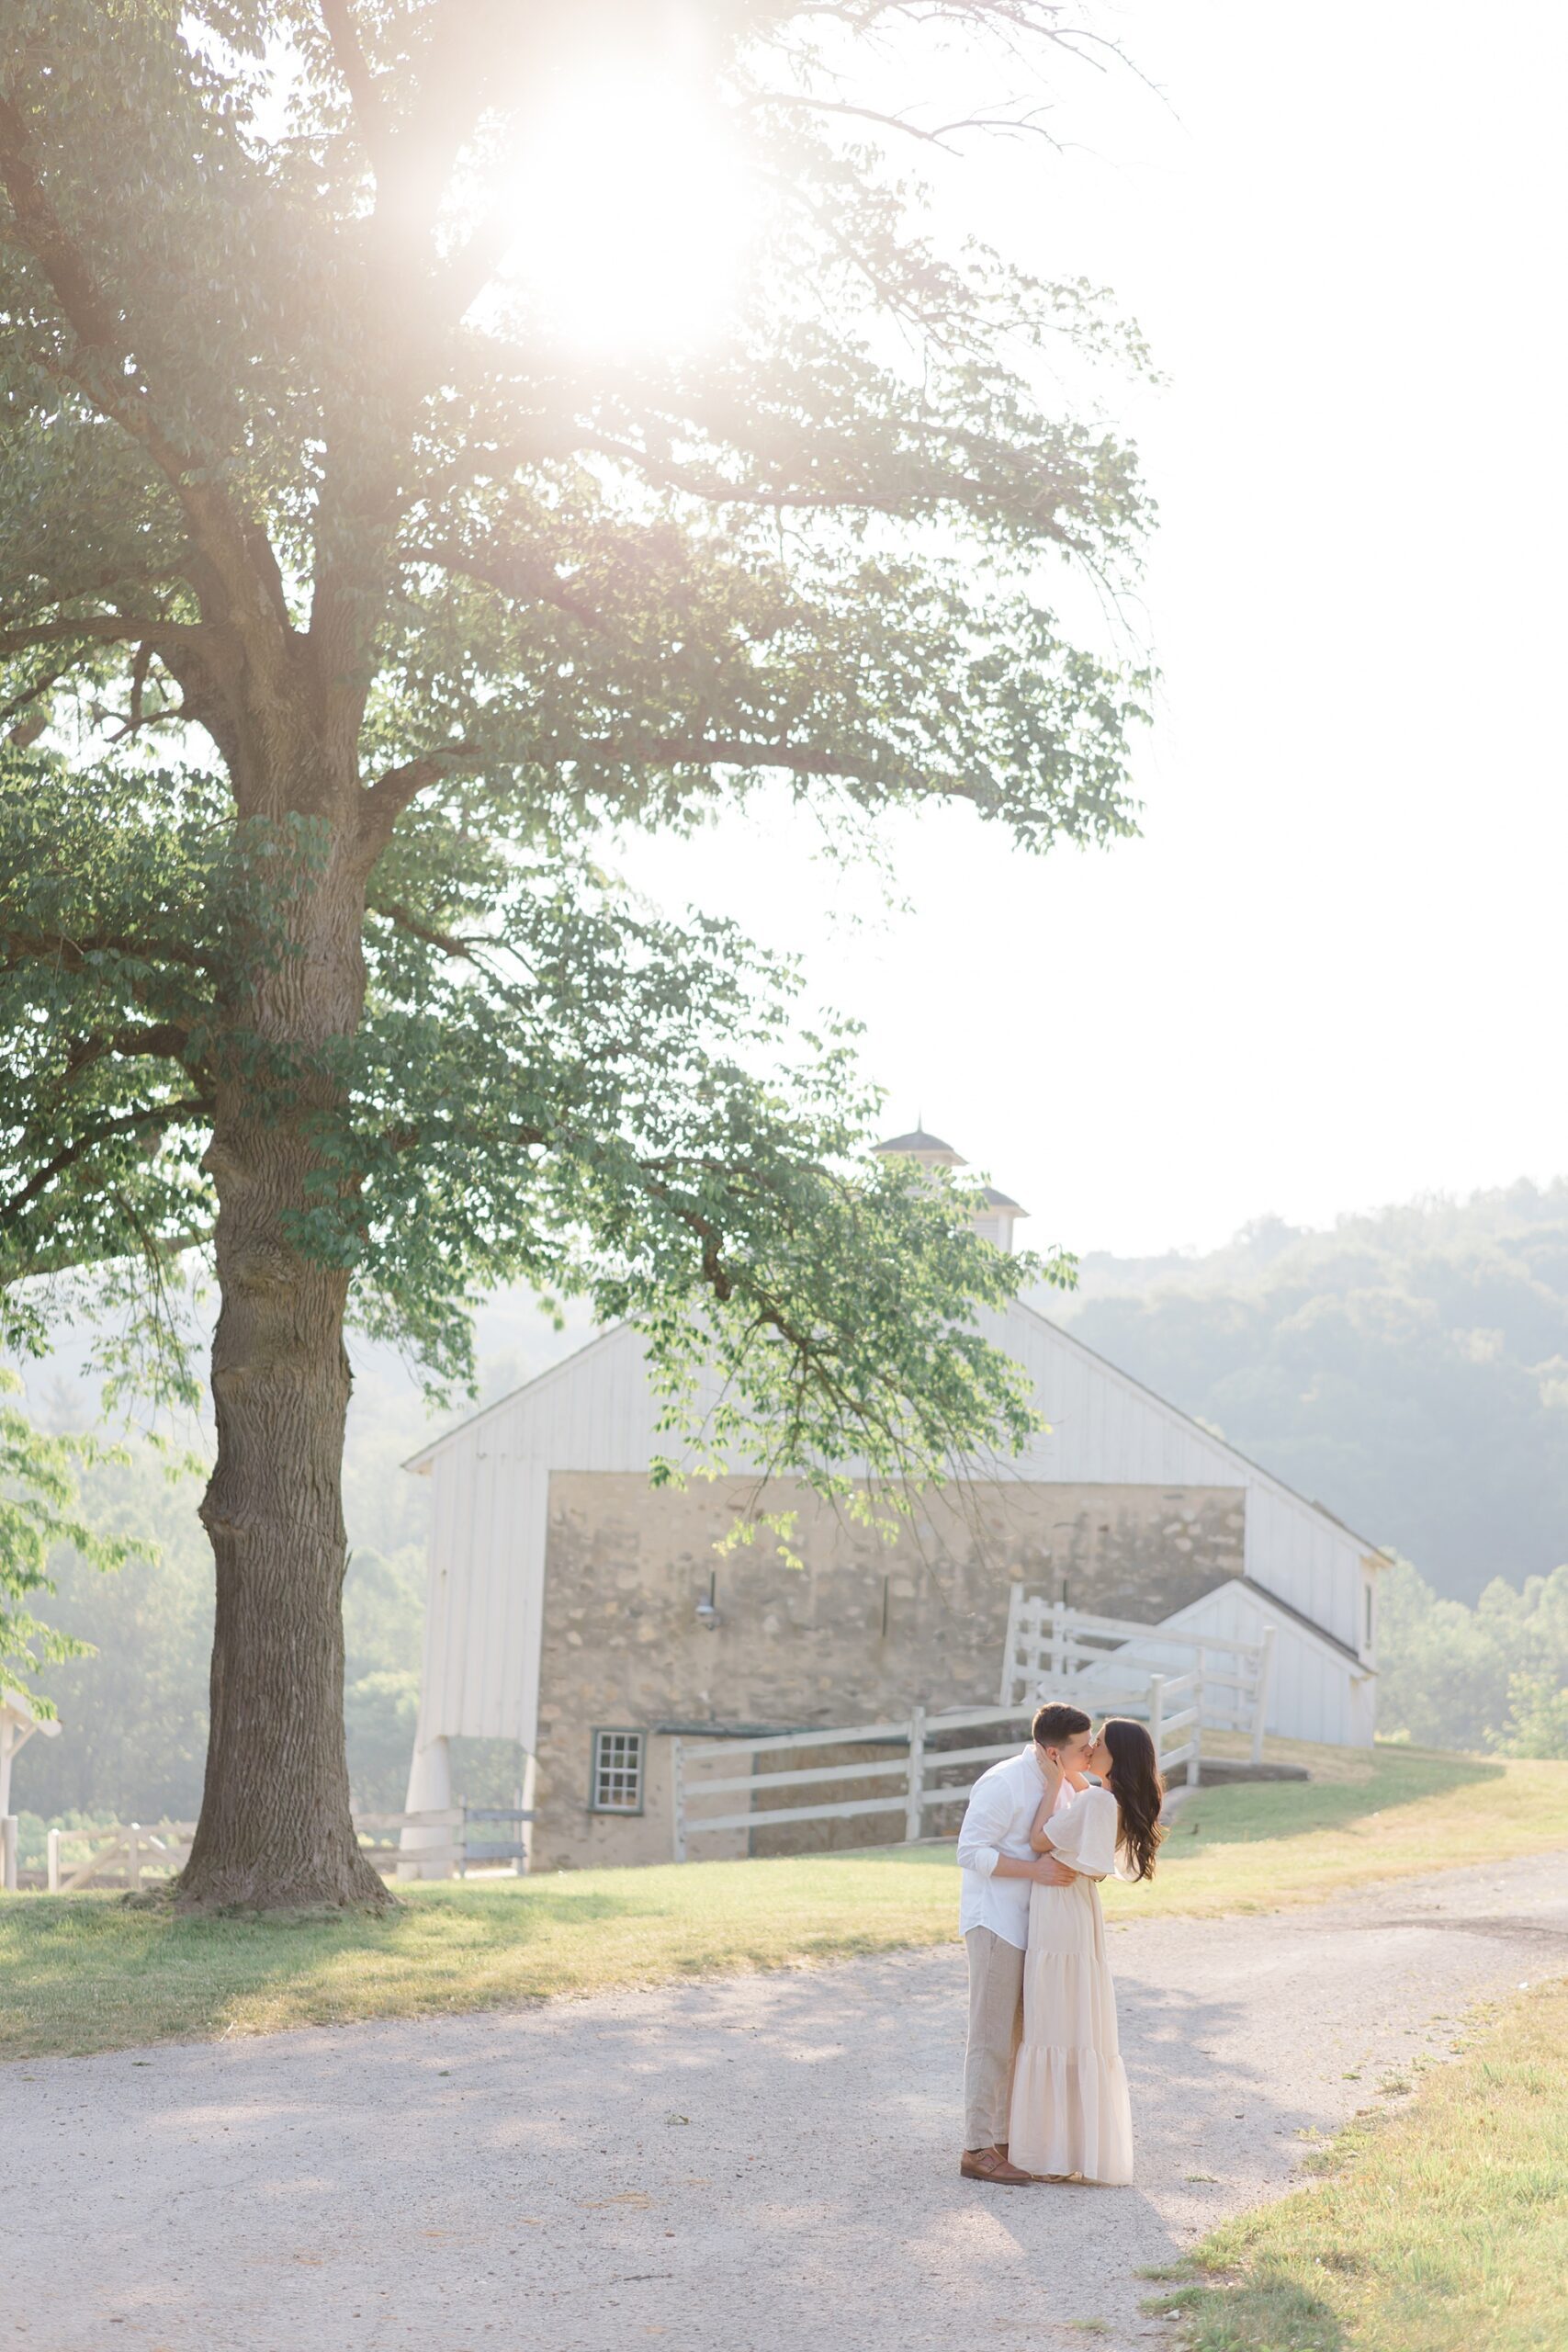 couple kiss in front of barn at sunset in Valley Forge, PA